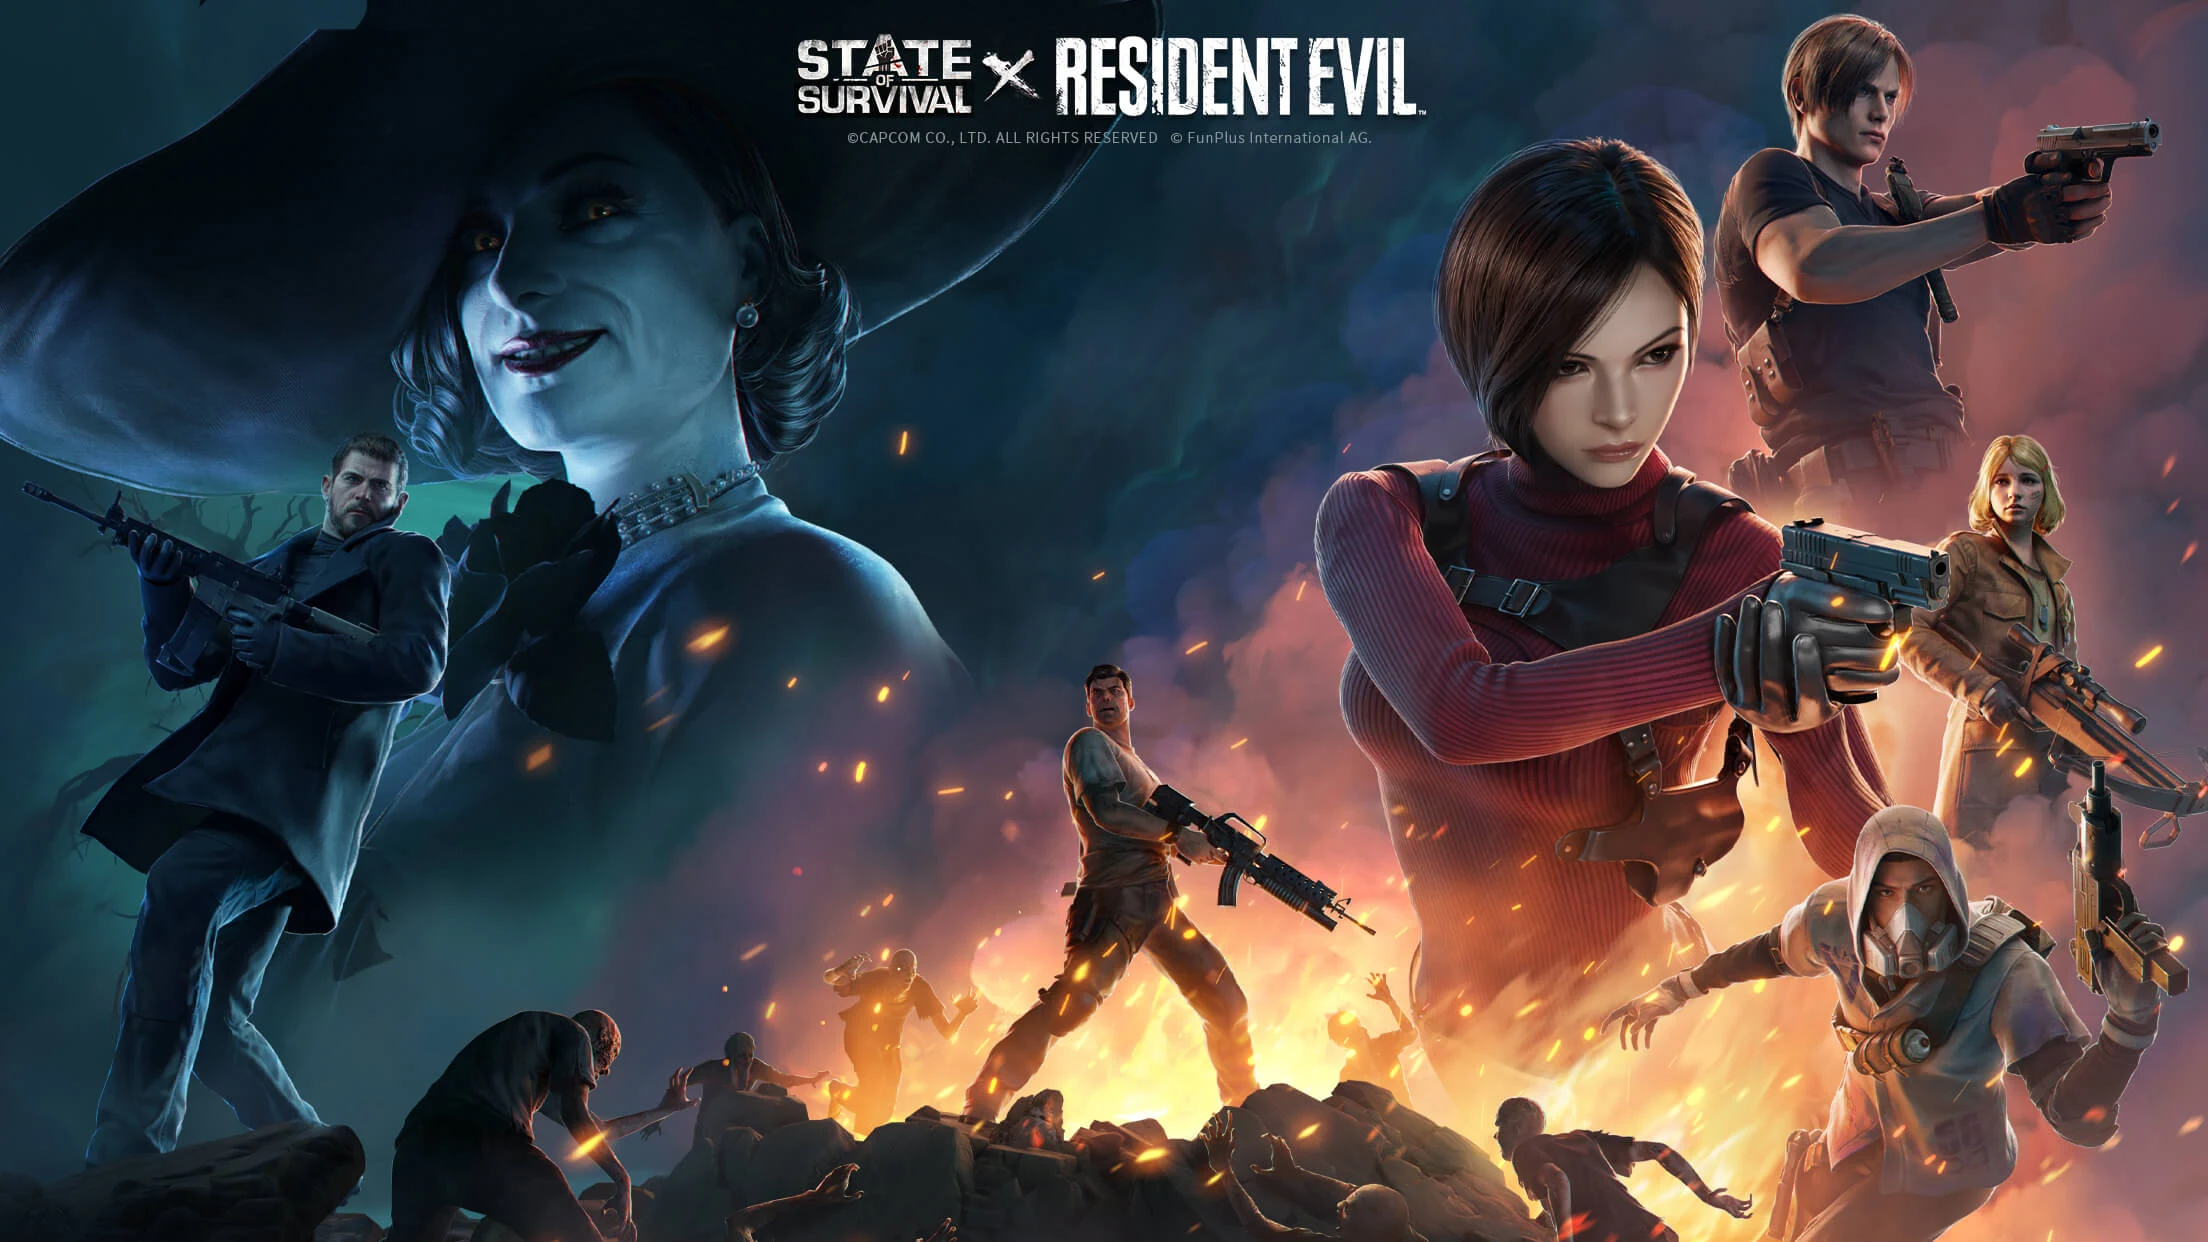 State of Survival x Resident Evil 4 Brings With It Exciting New Content